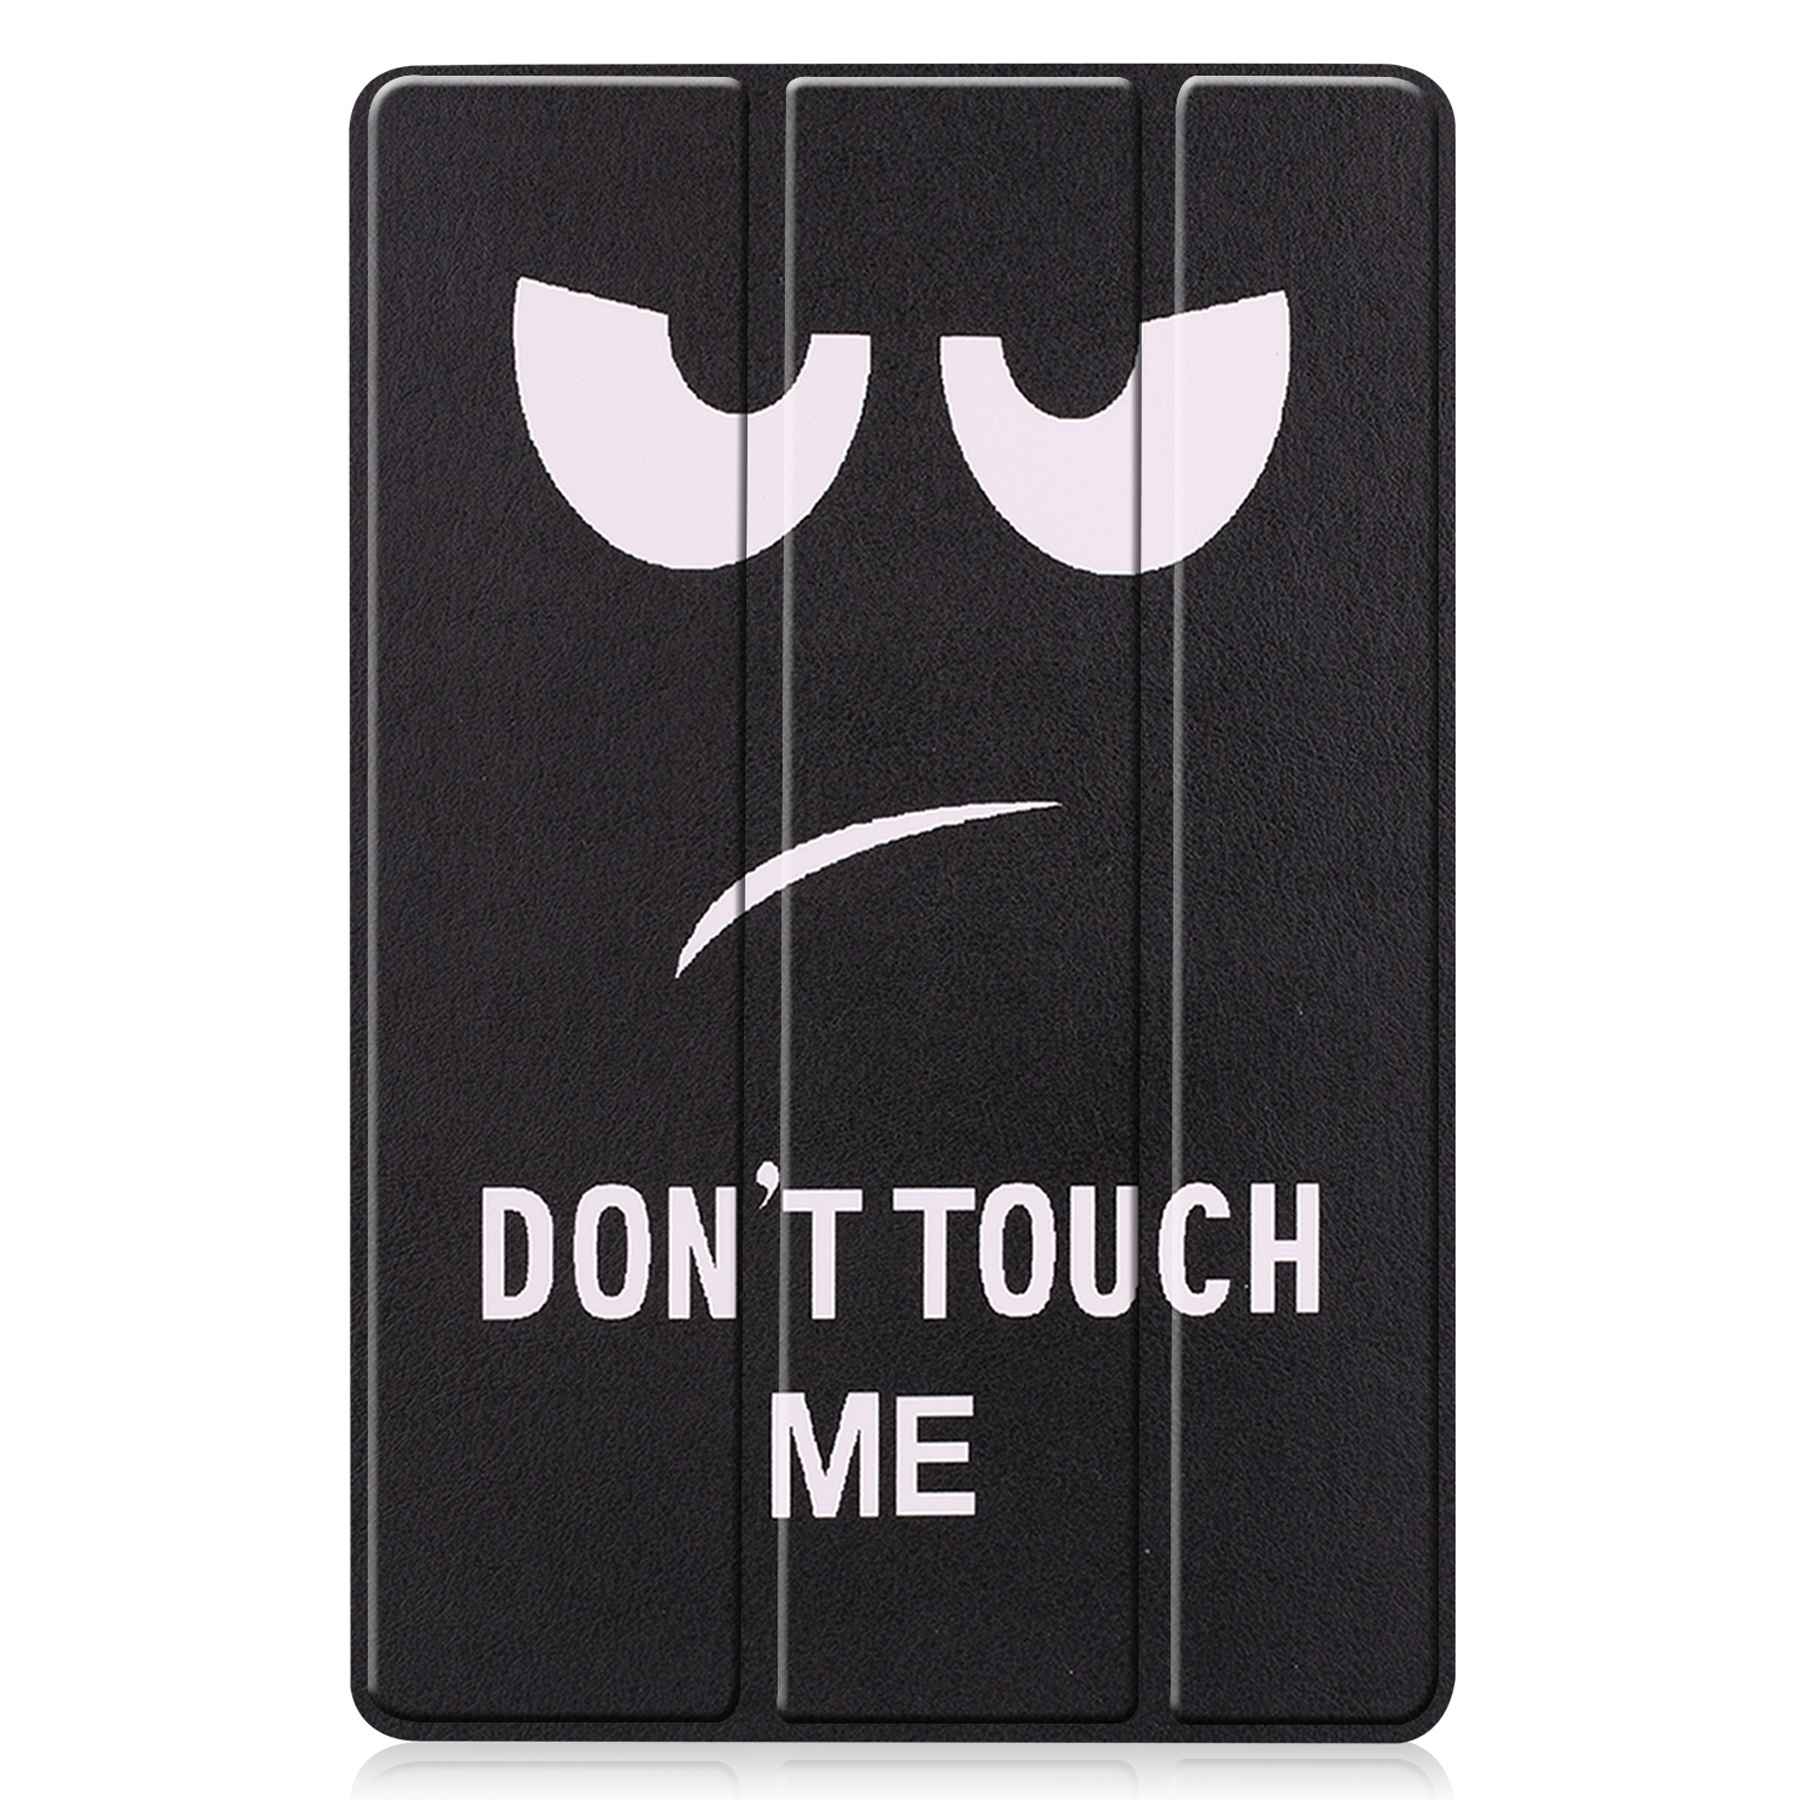 BASEY. Hoesje Geschikt voor Samsung Galaxy Tab S8 Plus Hoes Case Tablet Hoesje Tri-fold - Hoes Geschikt voor Samsung Tab S8 Plus Hoesje Hard Cover Bookcase Hoes - Don't Touch Me